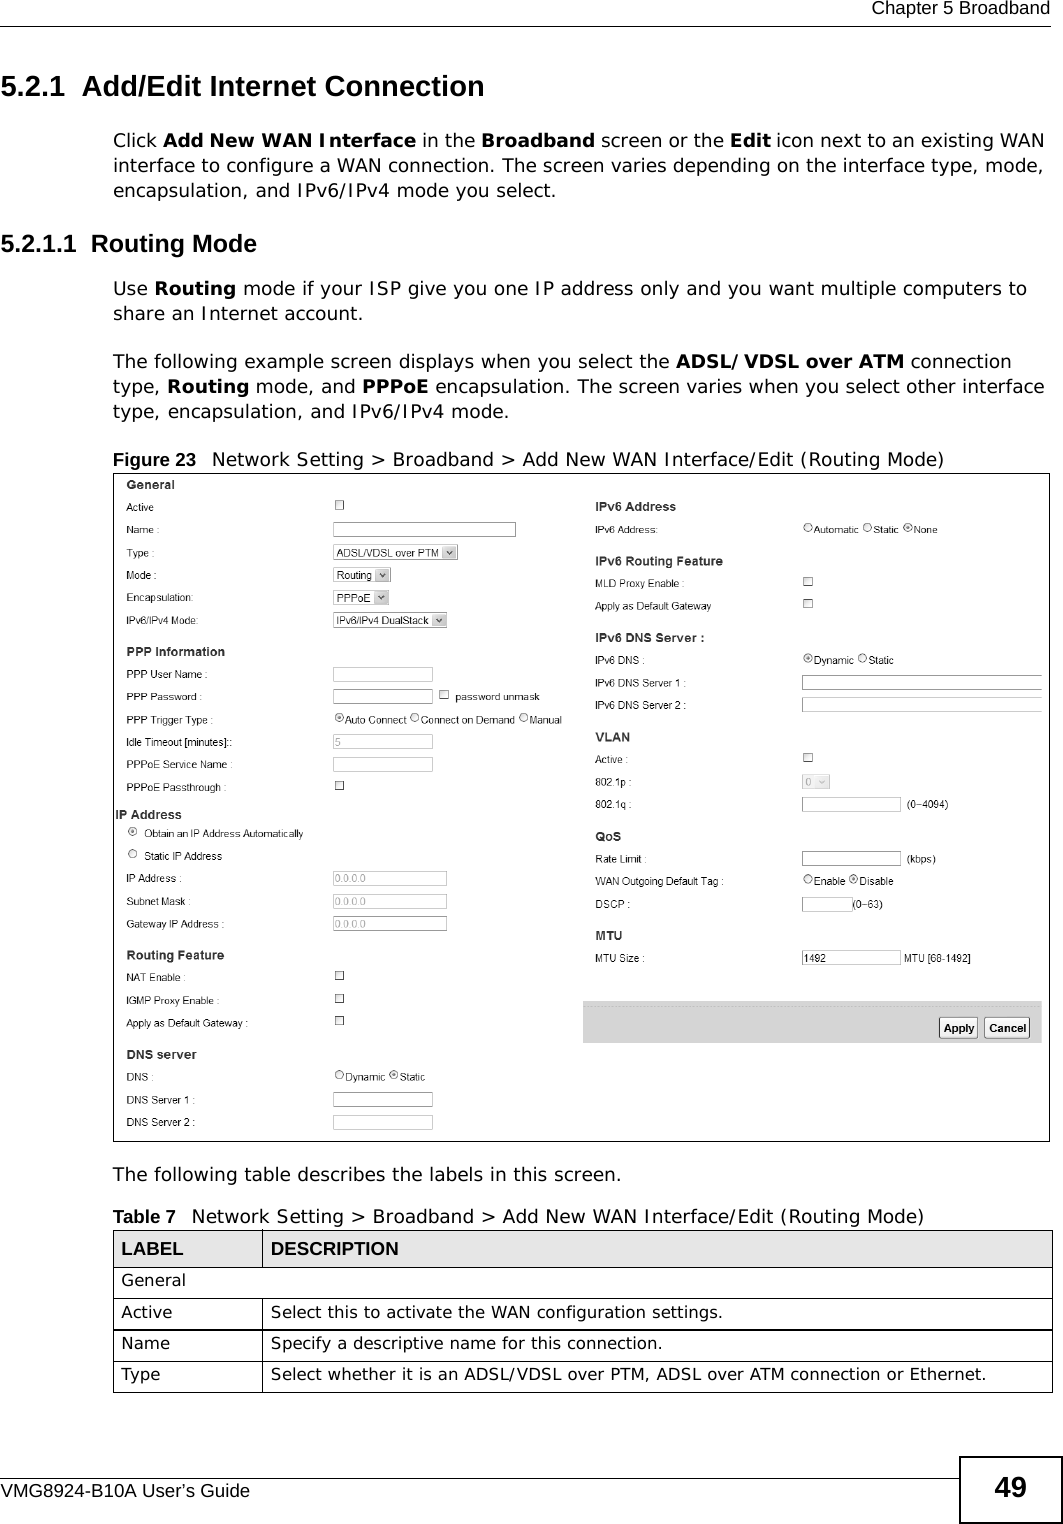  Chapter 5 BroadbandVMG8924-B10A User’s Guide 495.2.1  Add/Edit Internet ConnectionClick Add New WAN Interface in the Broadband screen or the Edit icon next to an existing WAN interface to configure a WAN connection. The screen varies depending on the interface type, mode, encapsulation, and IPv6/IPv4 mode you select. 5.2.1.1  Routing ModeUse Routing mode if your ISP give you one IP address only and you want multiple computers to share an Internet account. The following example screen displays when you select the ADSL/VDSL over ATM connection type, Routing mode, and PPPoE encapsulation. The screen varies when you select other interface type, encapsulation, and IPv6/IPv4 mode.Figure 23   Network Setting &gt; Broadband &gt; Add New WAN Interface/Edit (Routing Mode)The following table describes the labels in this screen.Table 7   Network Setting &gt; Broadband &gt; Add New WAN Interface/Edit (Routing Mode)LABEL DESCRIPTIONGeneralActive Select this to activate the WAN configuration settings.Name Specify a descriptive name for this connection.Type Select whether it is an ADSL/VDSL over PTM, ADSL over ATM connection or Ethernet.